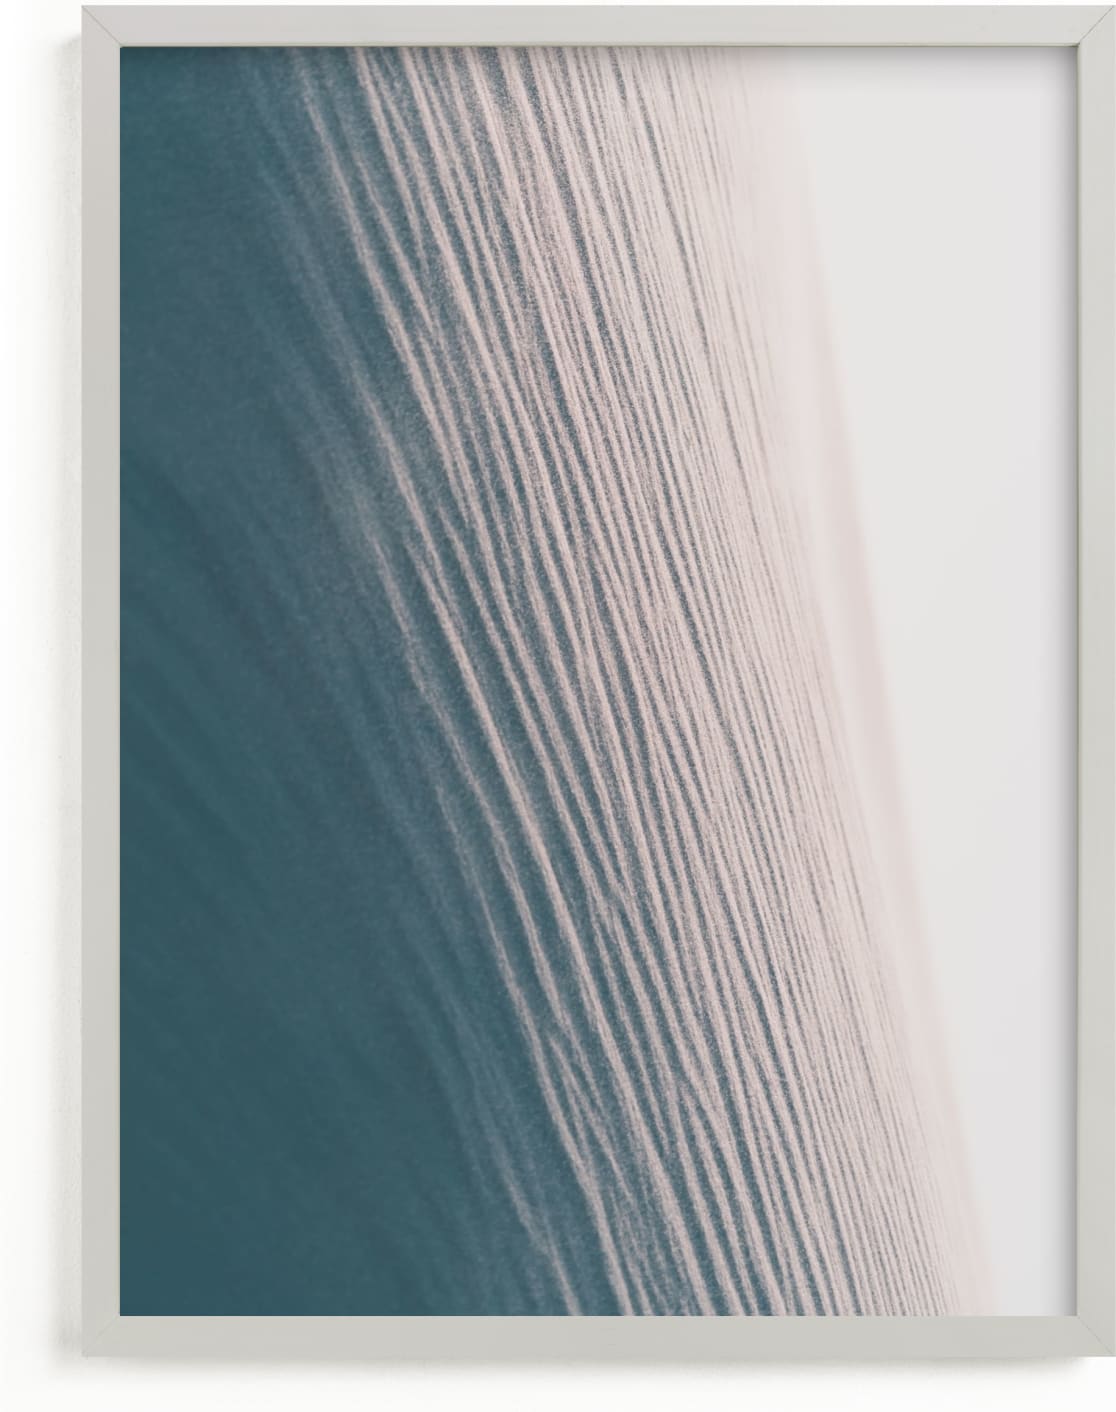 This is a grey art by Courtney Crane called Striations.